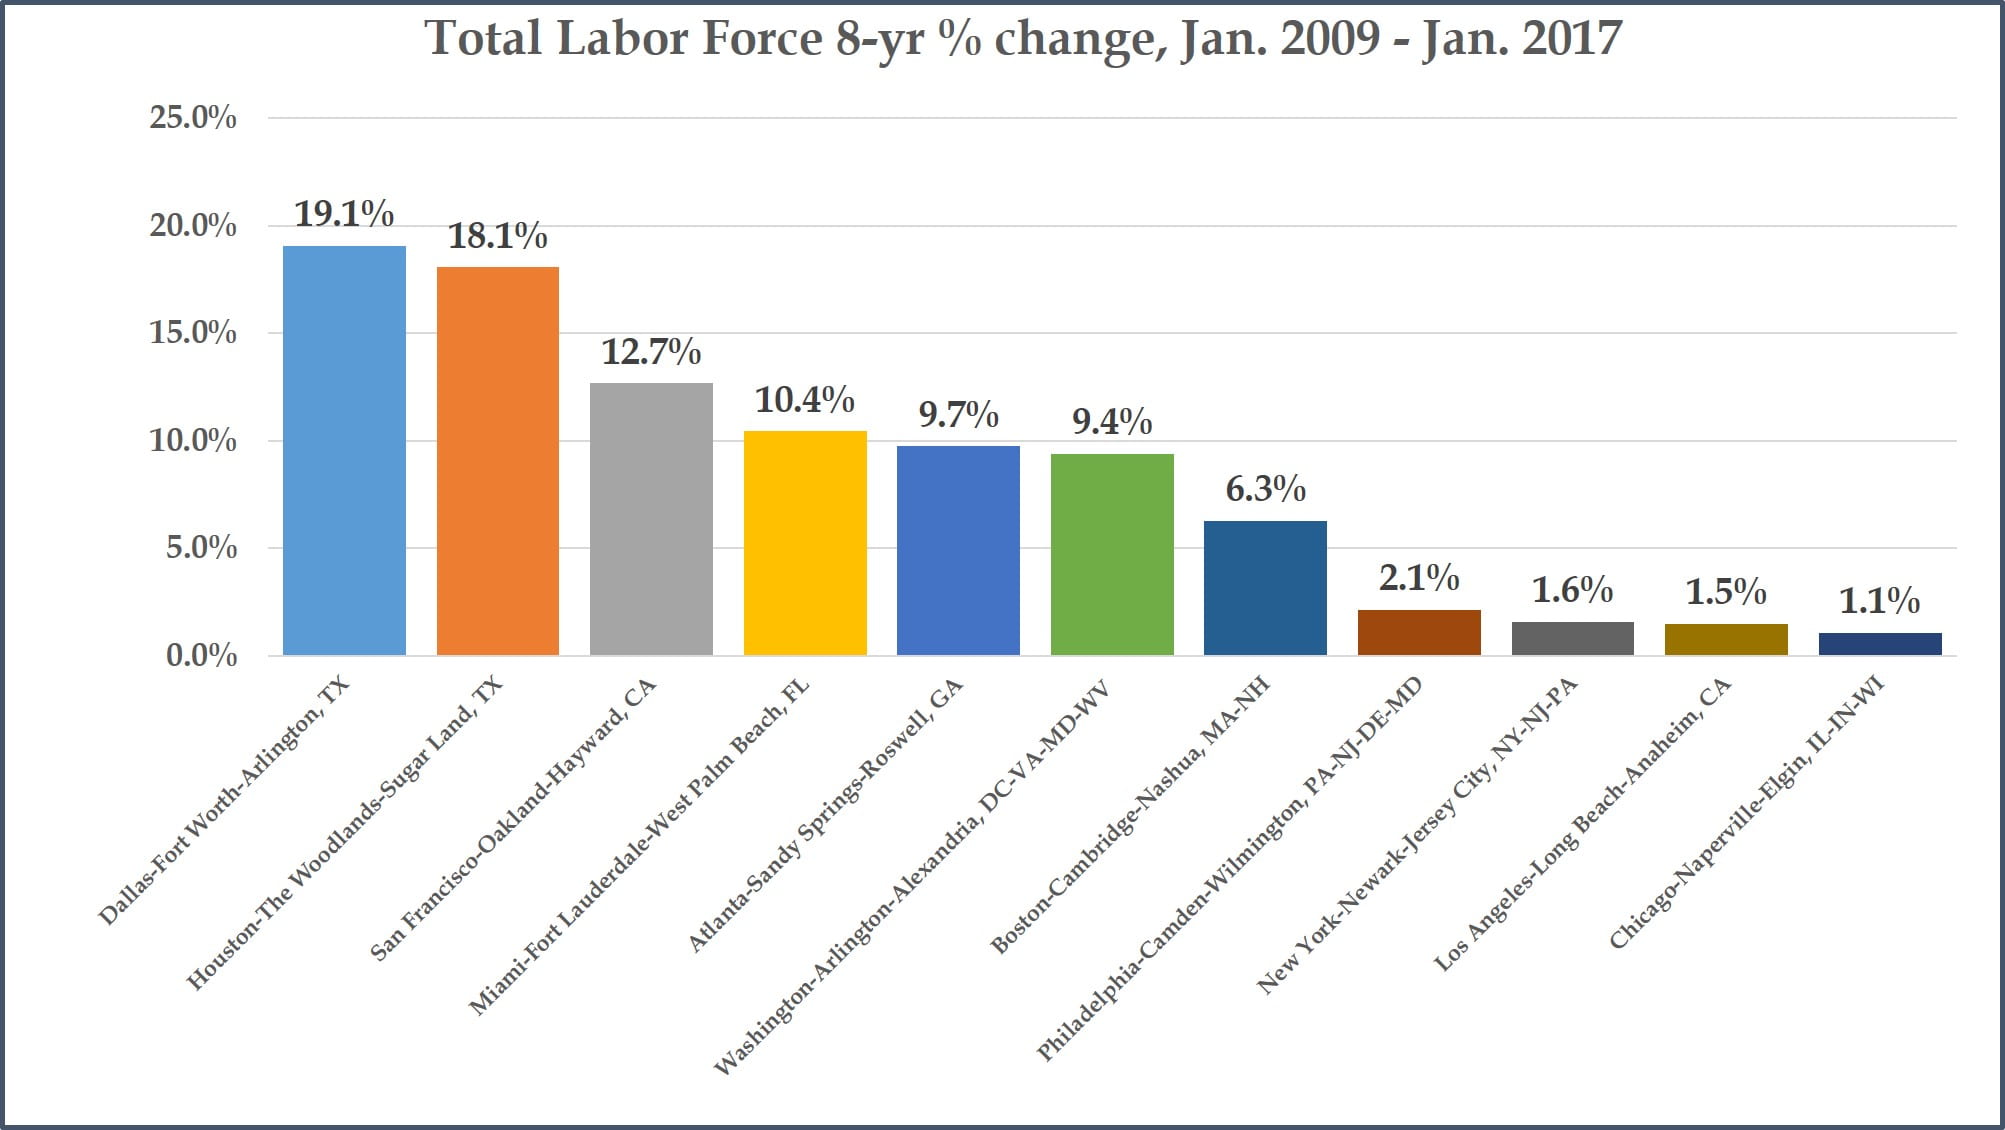 Total Labor Force - 8-year changes - Top Metros